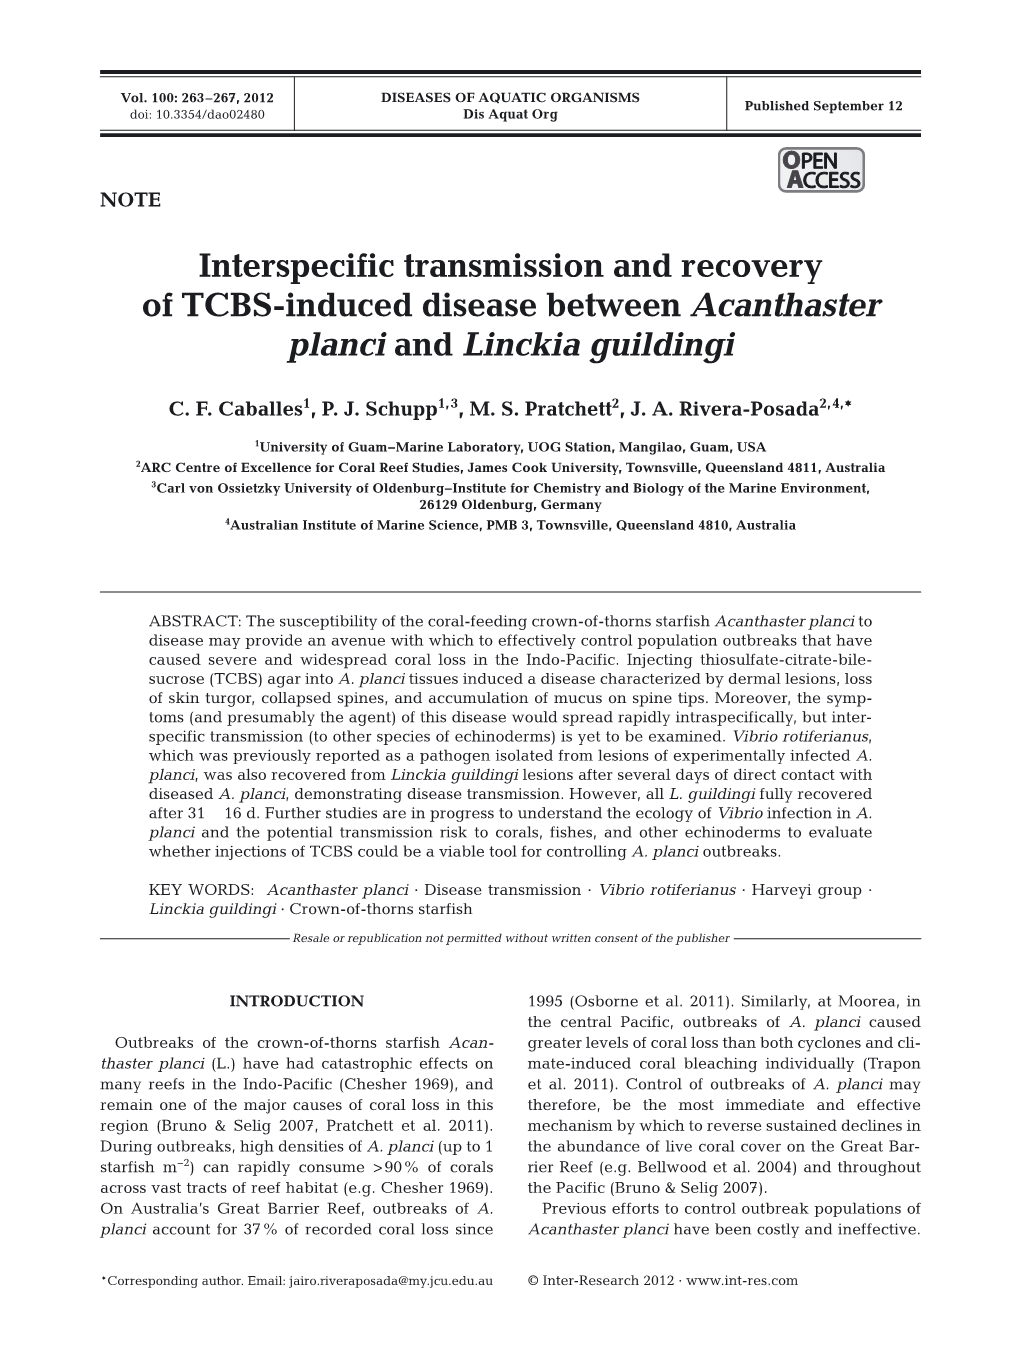 Interspecific Transmission and Recovery of TCBS-Induced Disease Between Acanthaster Planci and Linckia Guildingi